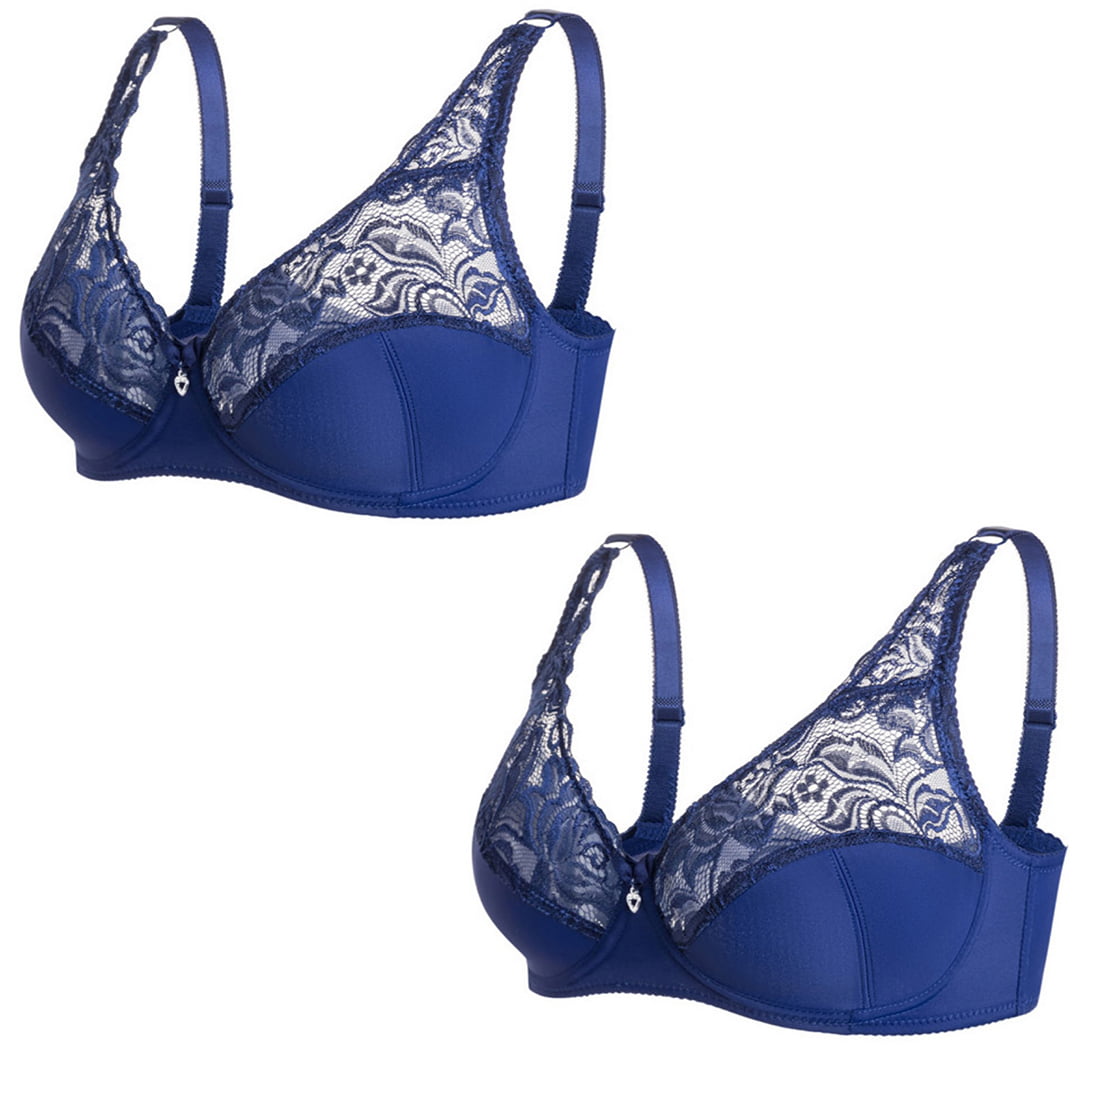 Bras for Women Support and Lift Big Breast - Embroidery Floral Lace 3/4  Cups Non-Padded Plus Size Push up Full-Coverage Wirefree Bra,for Everyday